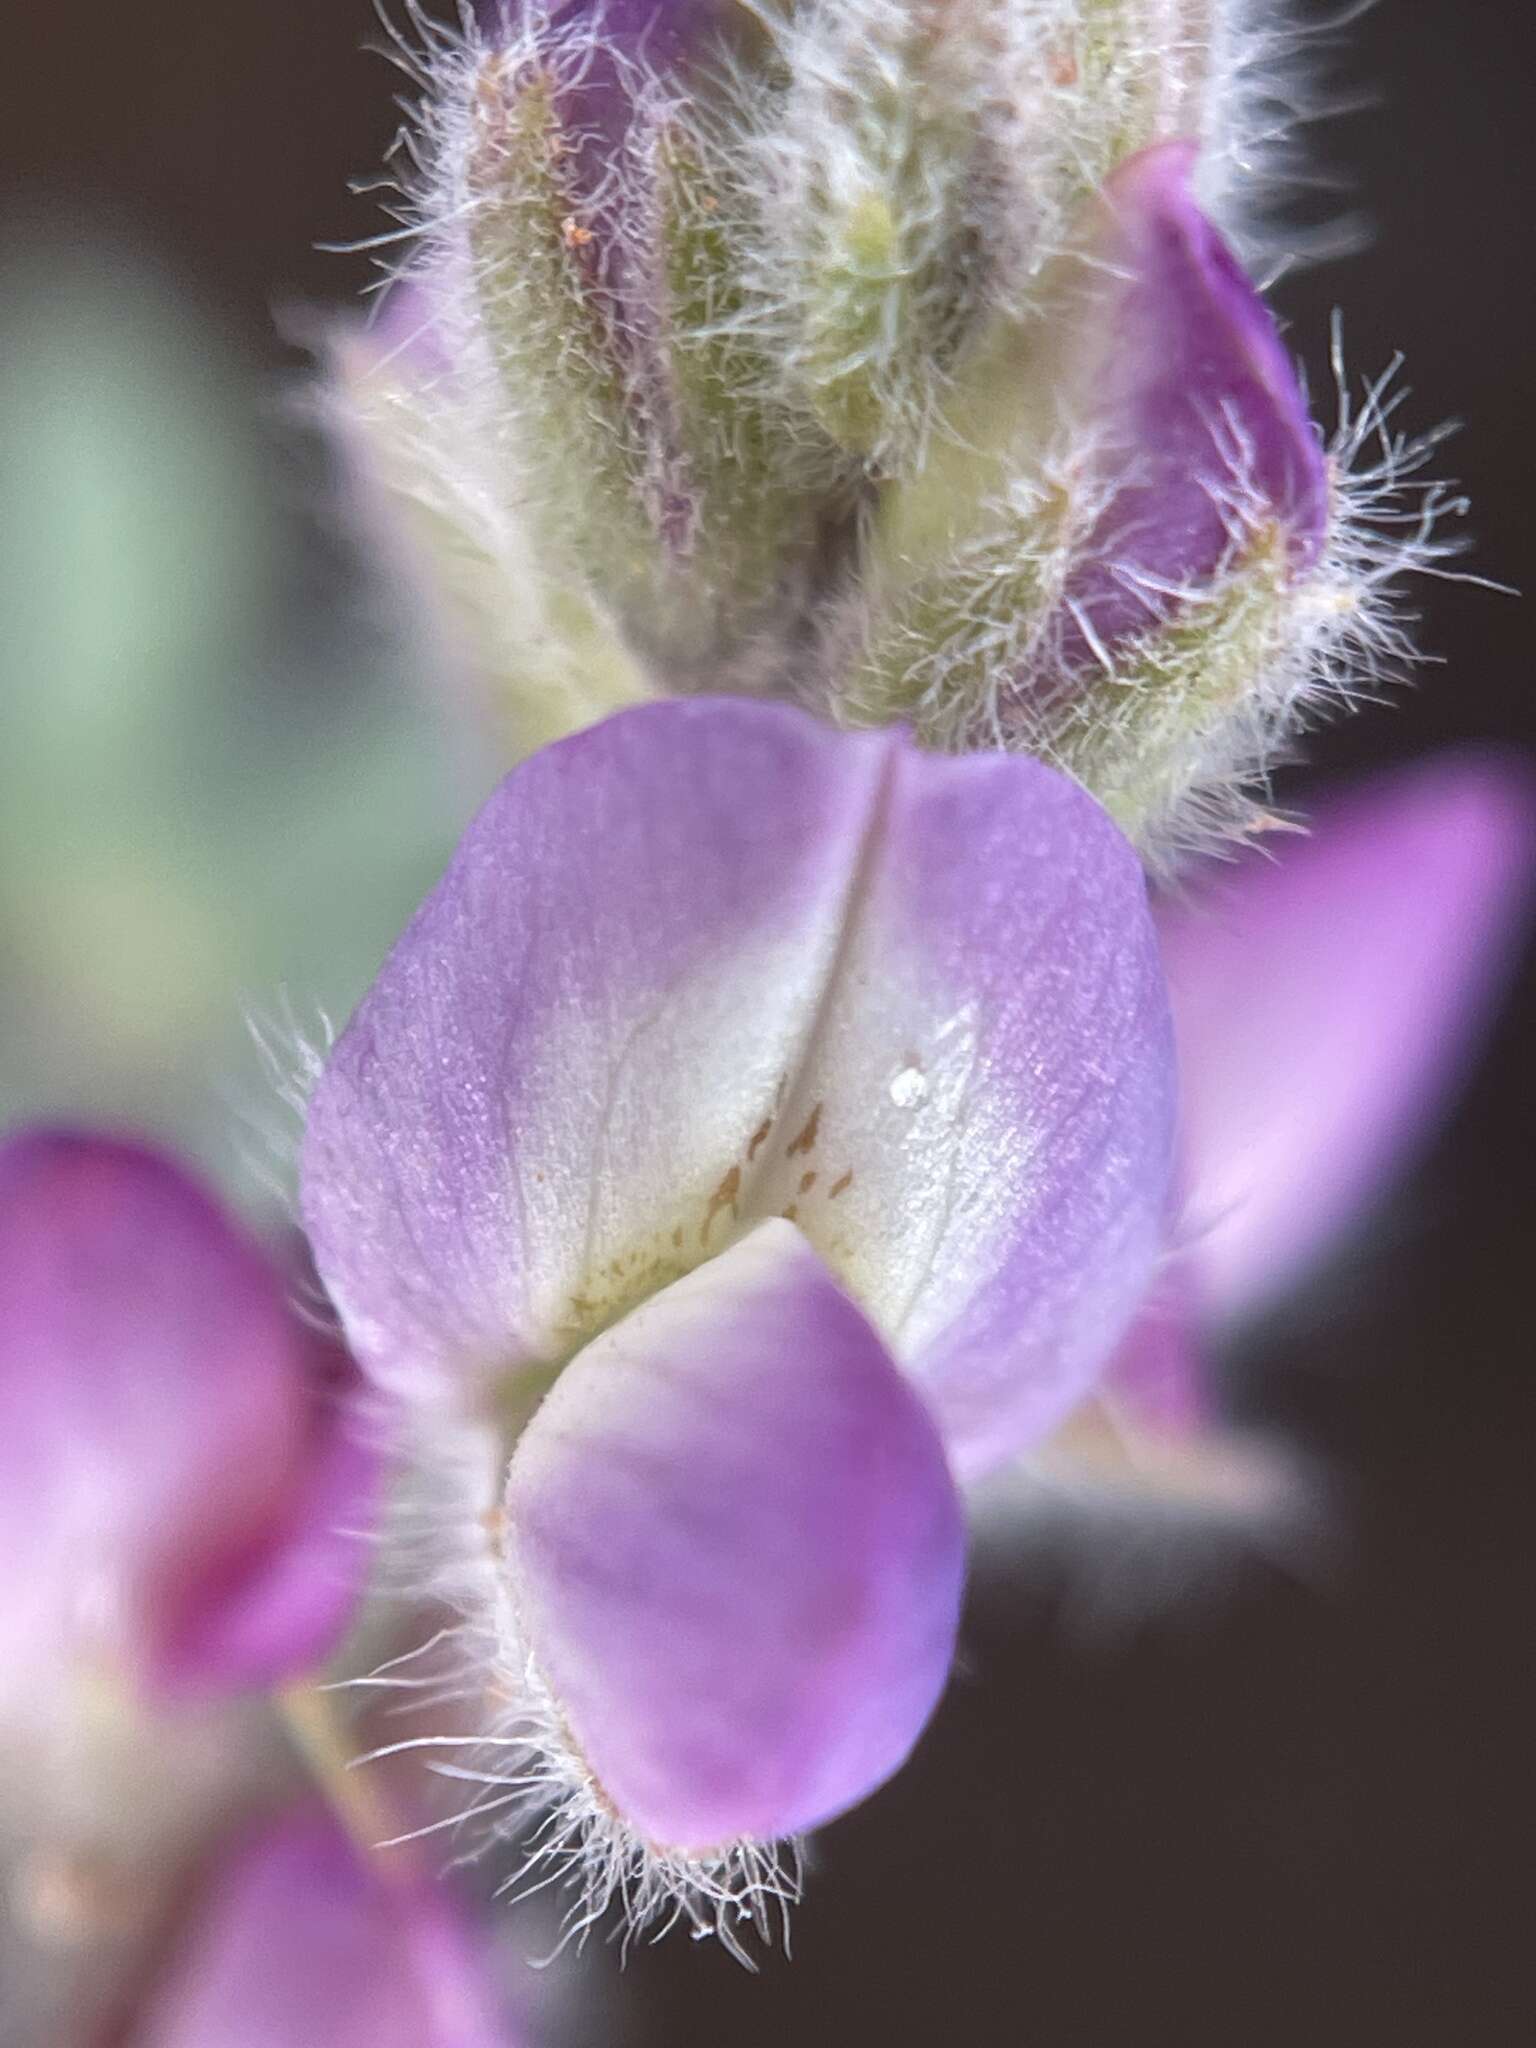 Image of Orcutt's lupine